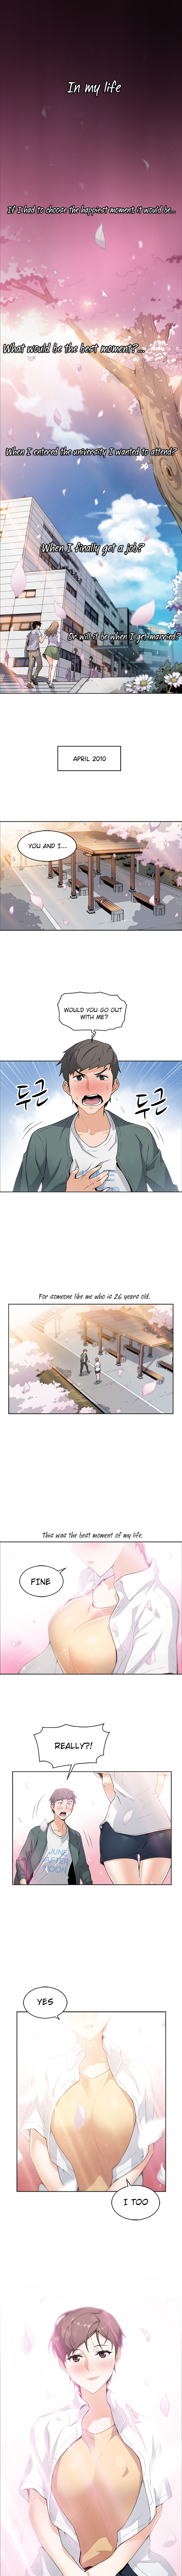 Housekeeper Manhwa - Chapter 1 Page 1